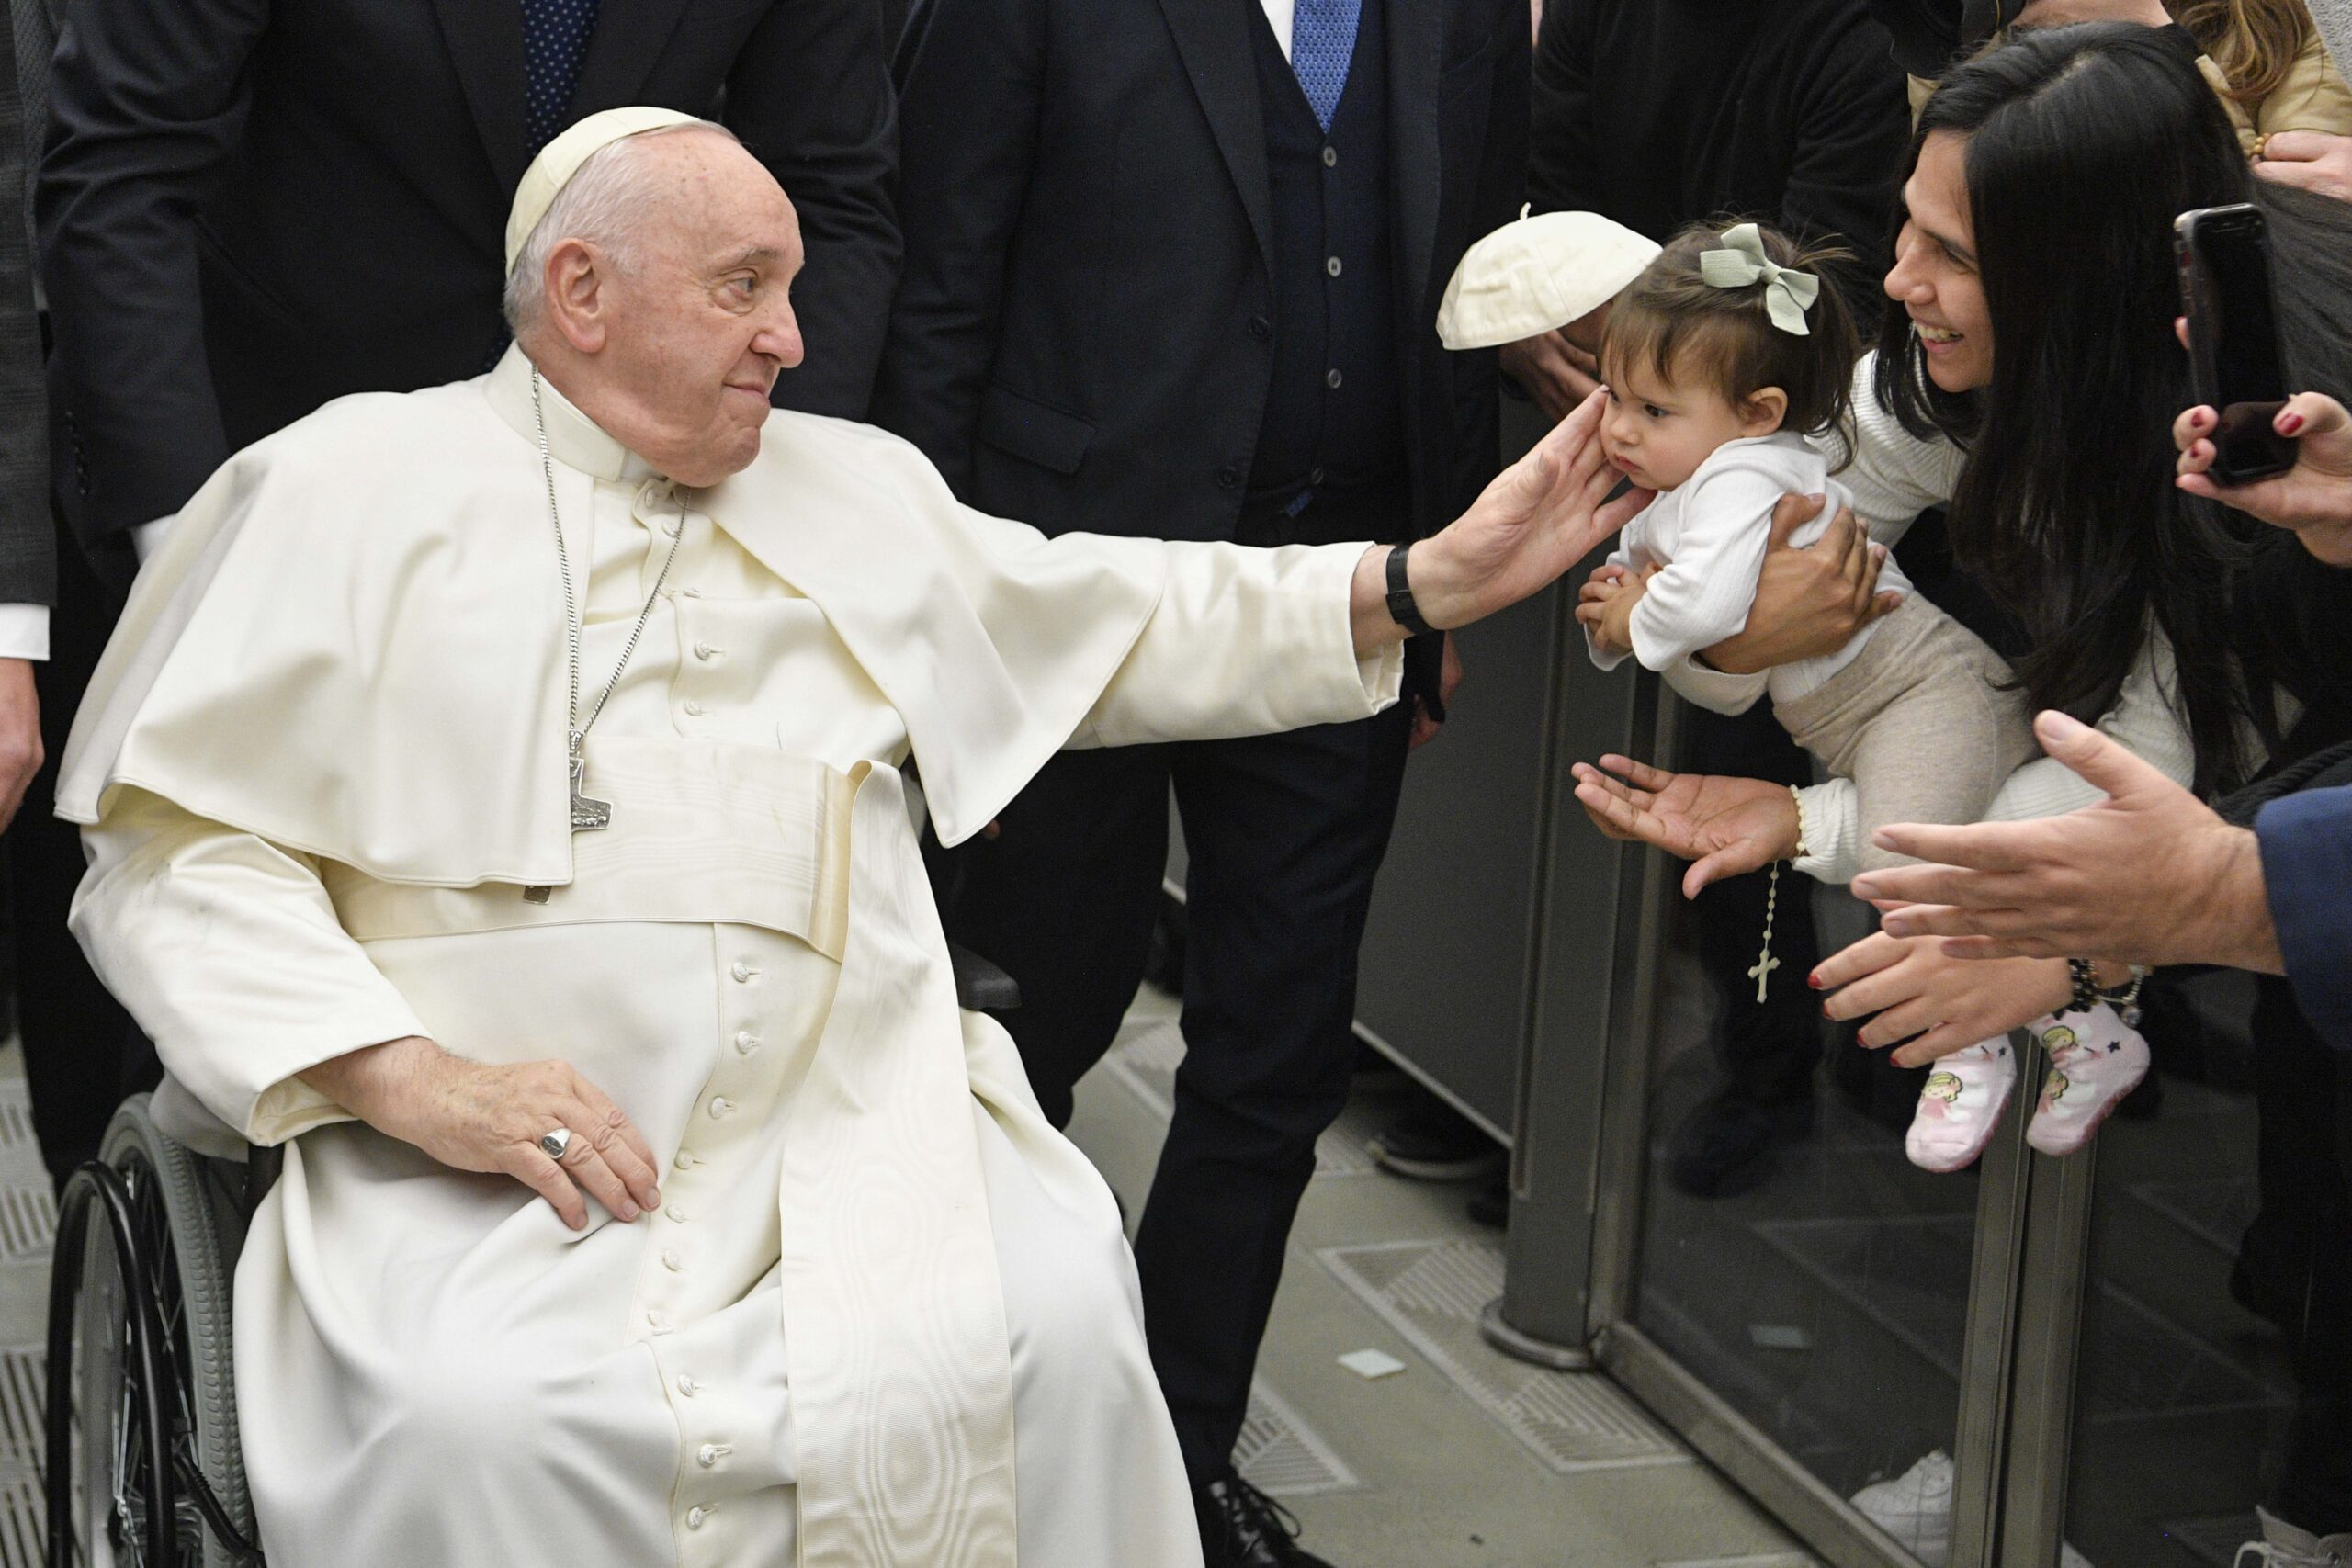 Pope Francis greets a baby during his general audience at the Vatican Jan. 25, 2023.